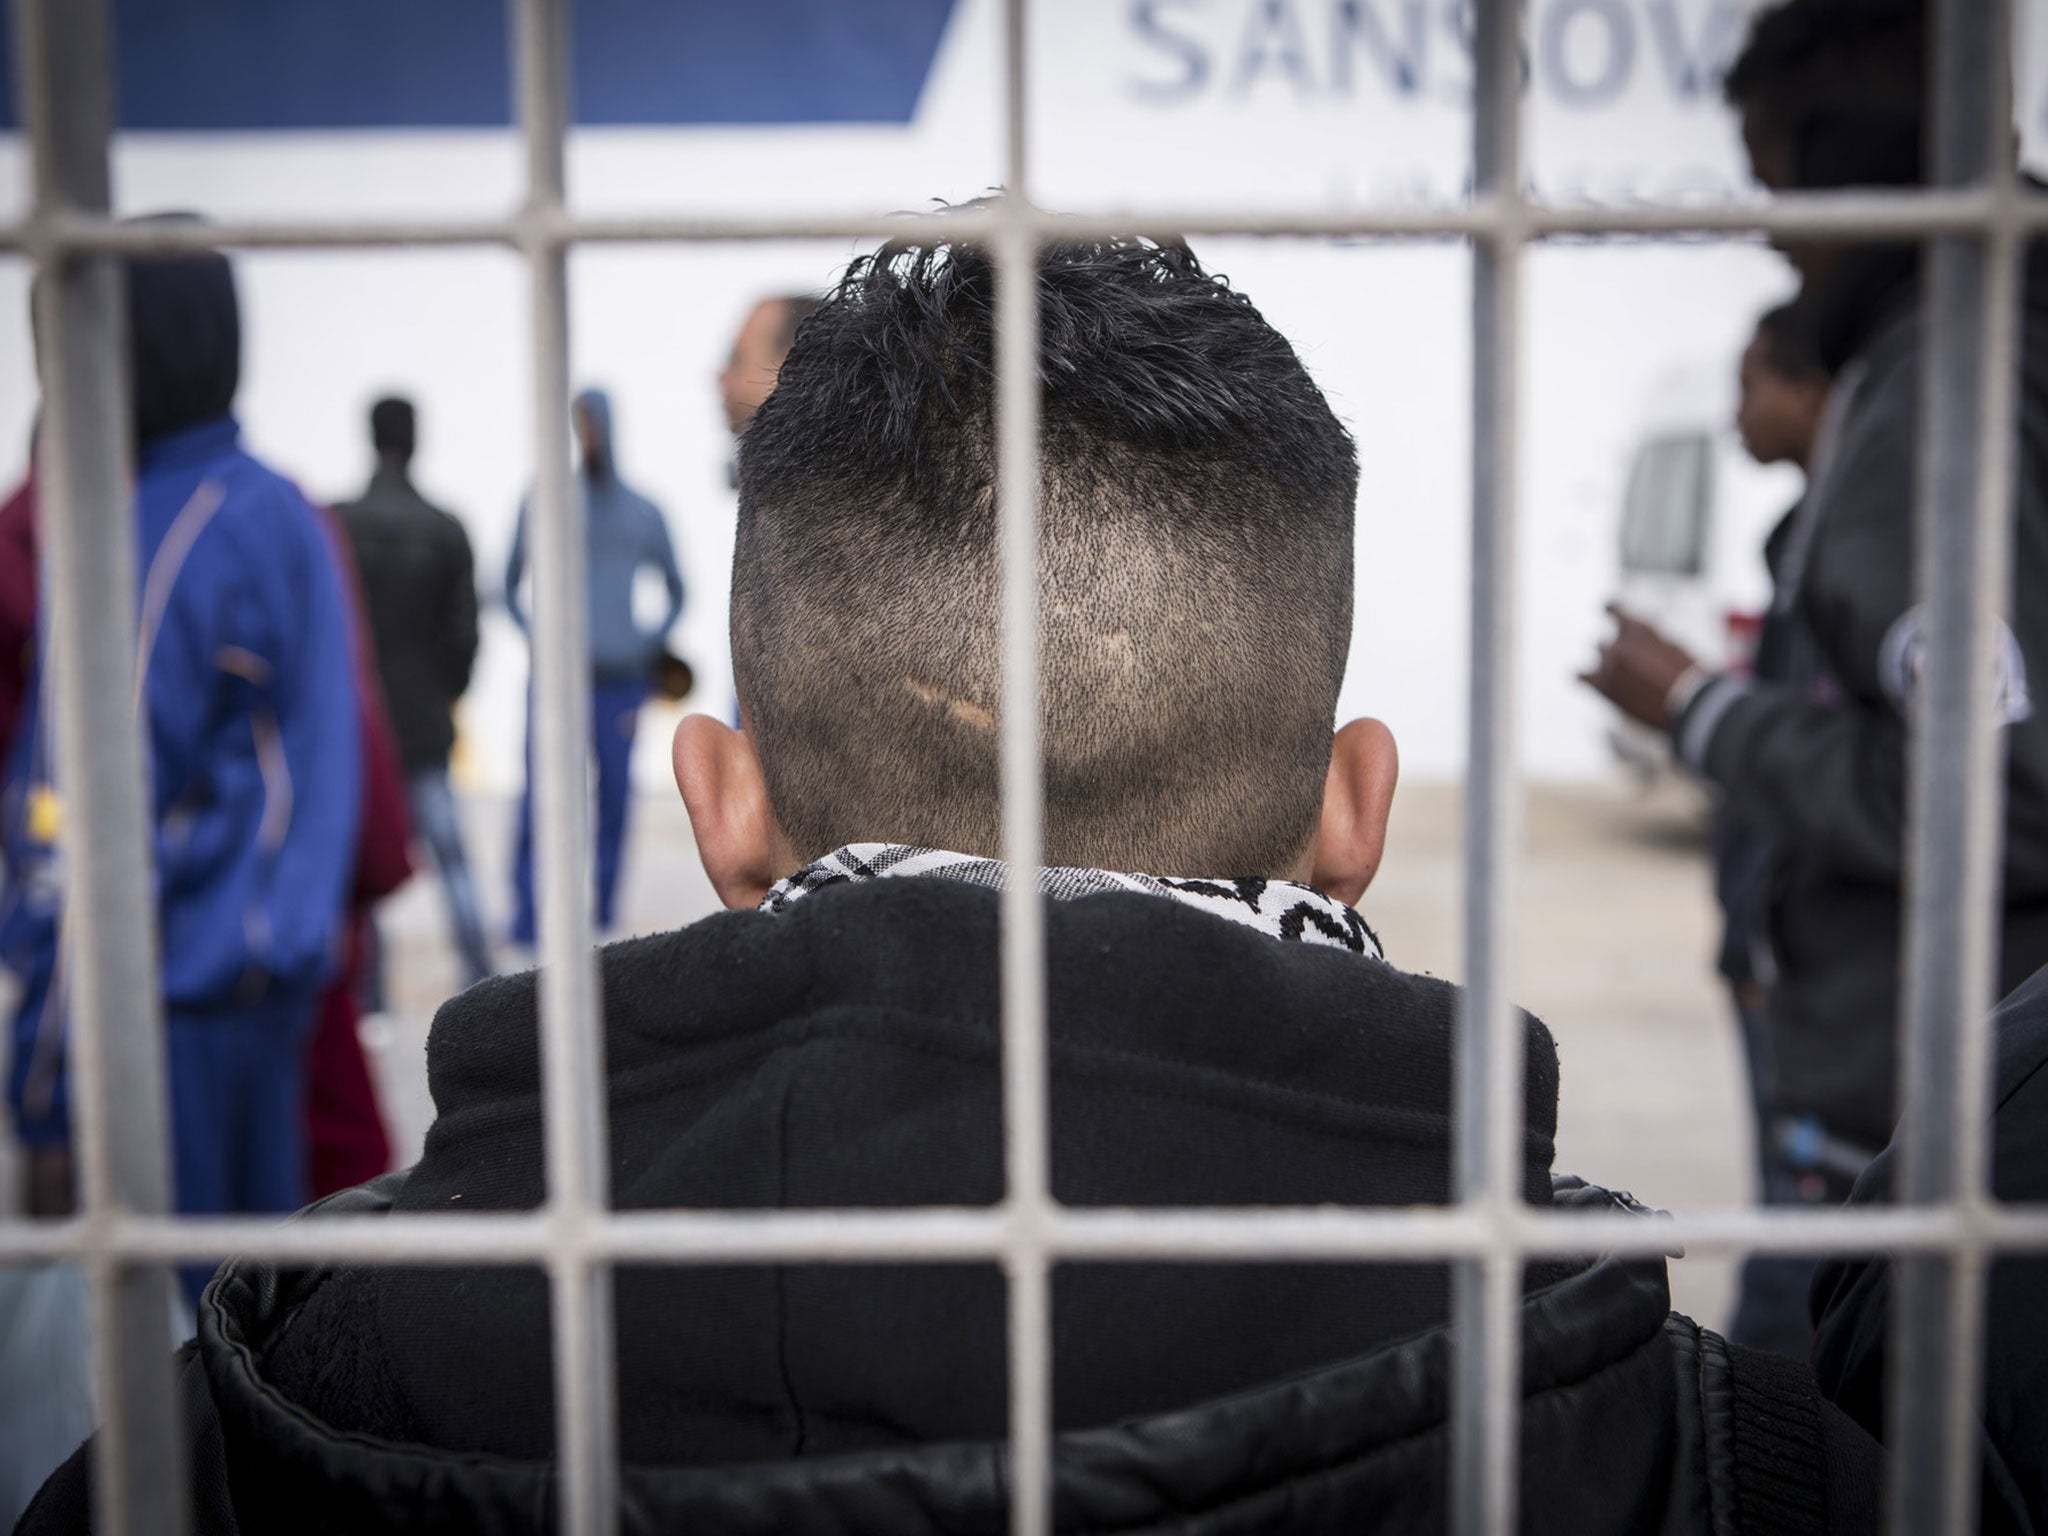 Yusuf, 17, waits along with 87 other unaccompanied children on the docks of Lampedusa, Italy